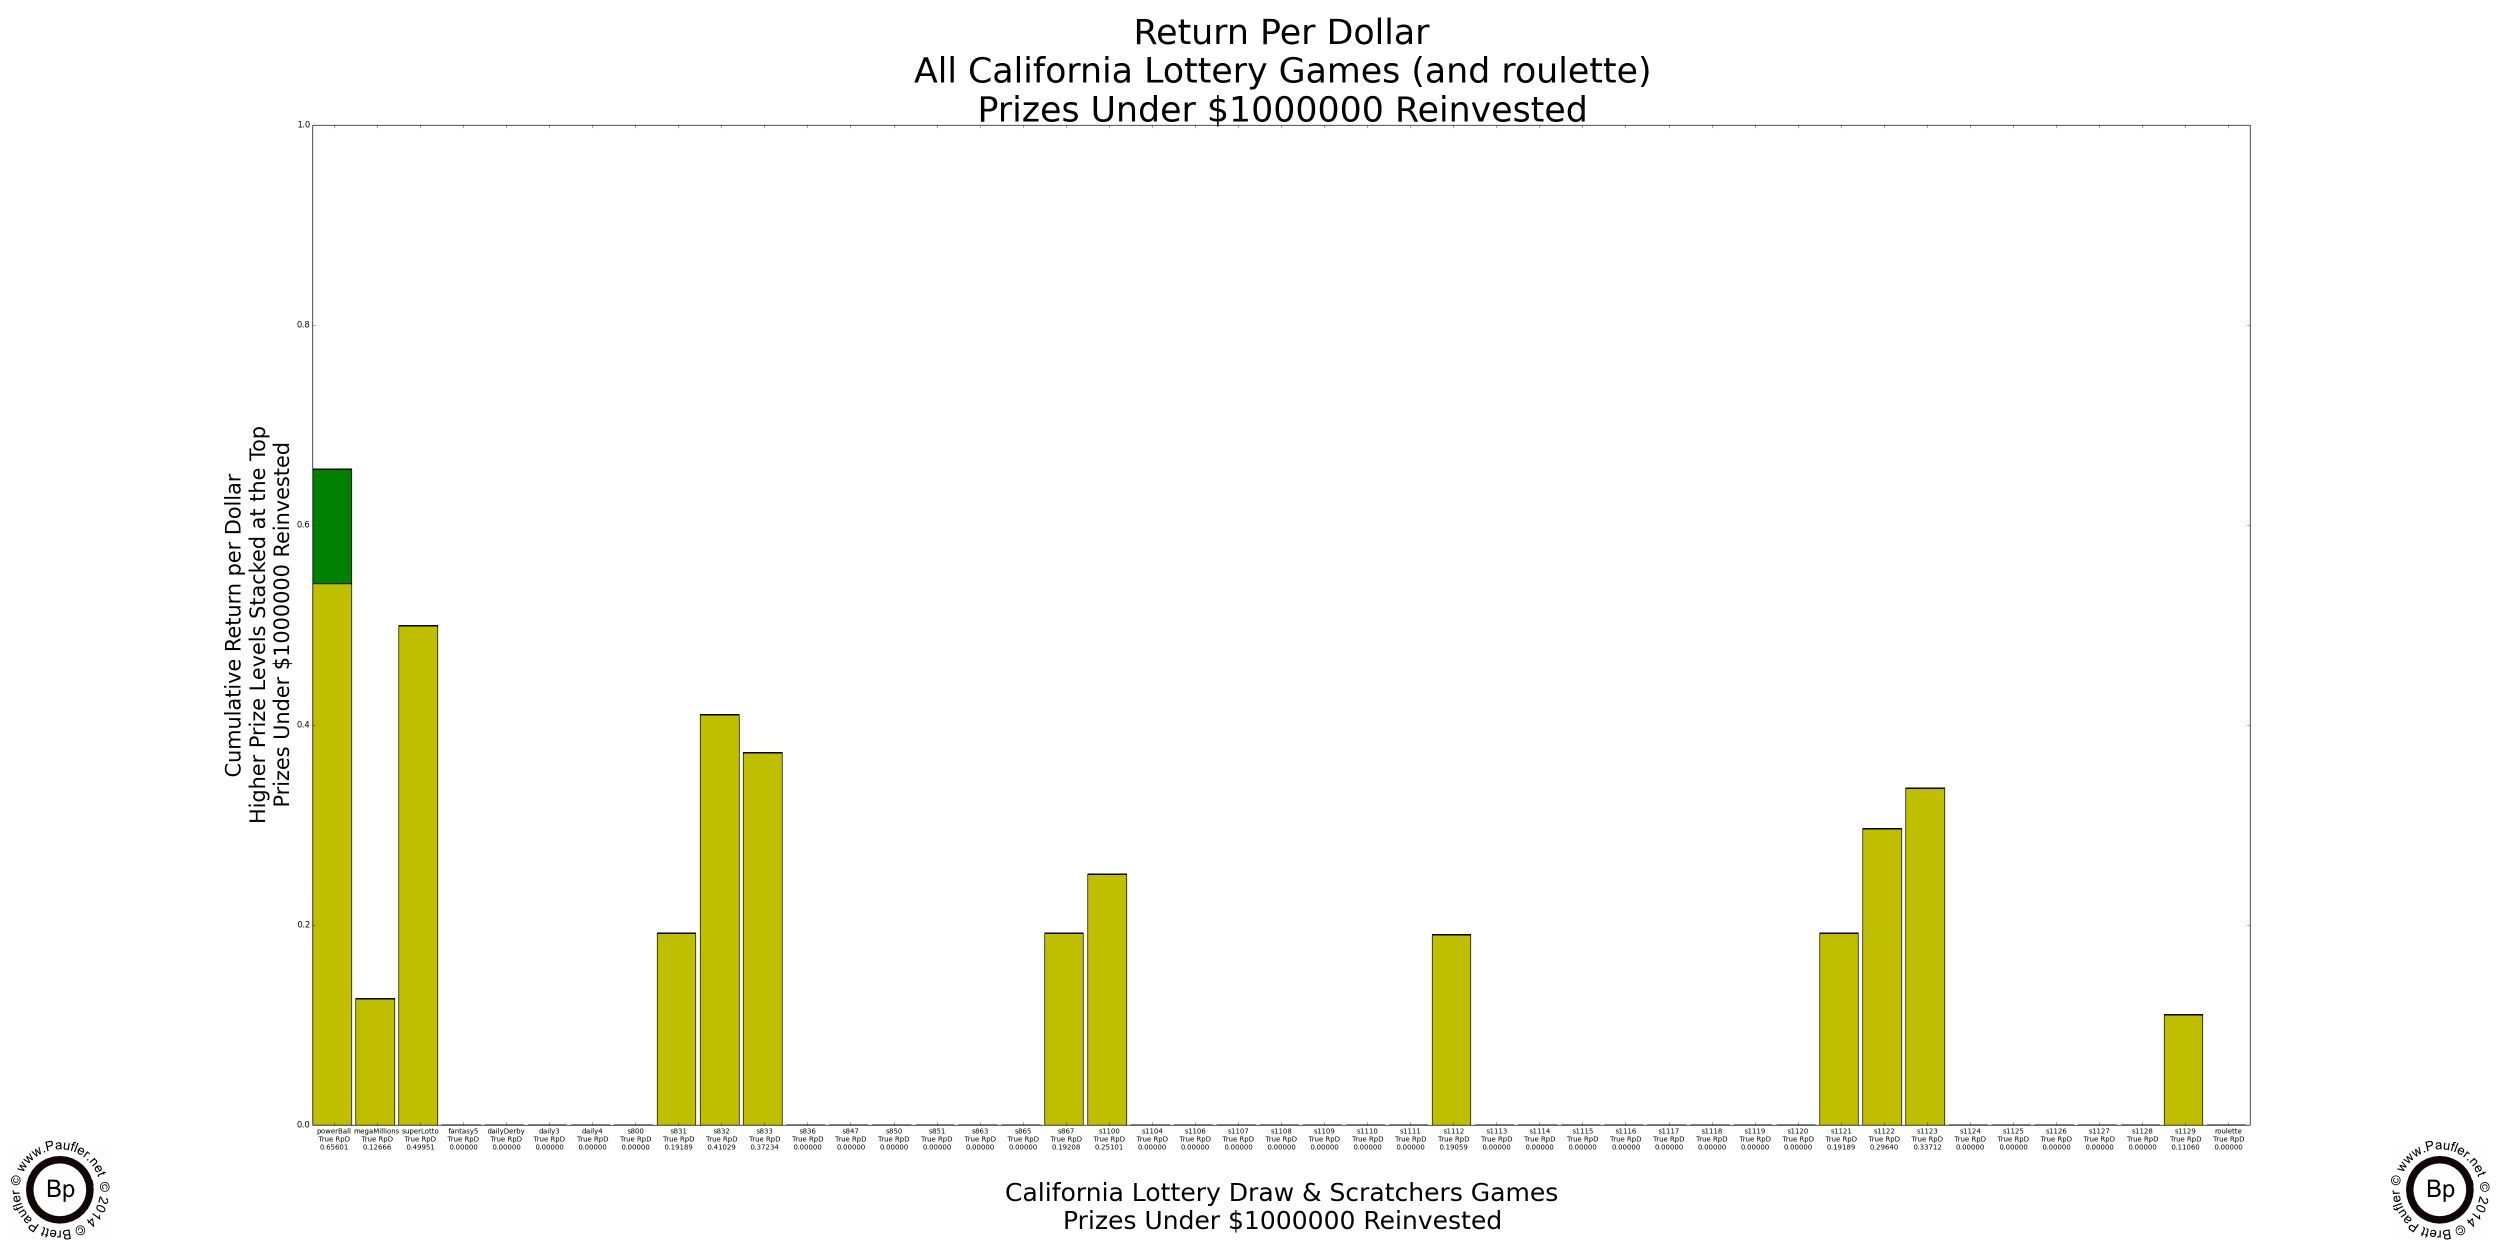 Graph of California Lottery Return per Dollar with Prizes below $1,000,000 Reinvested